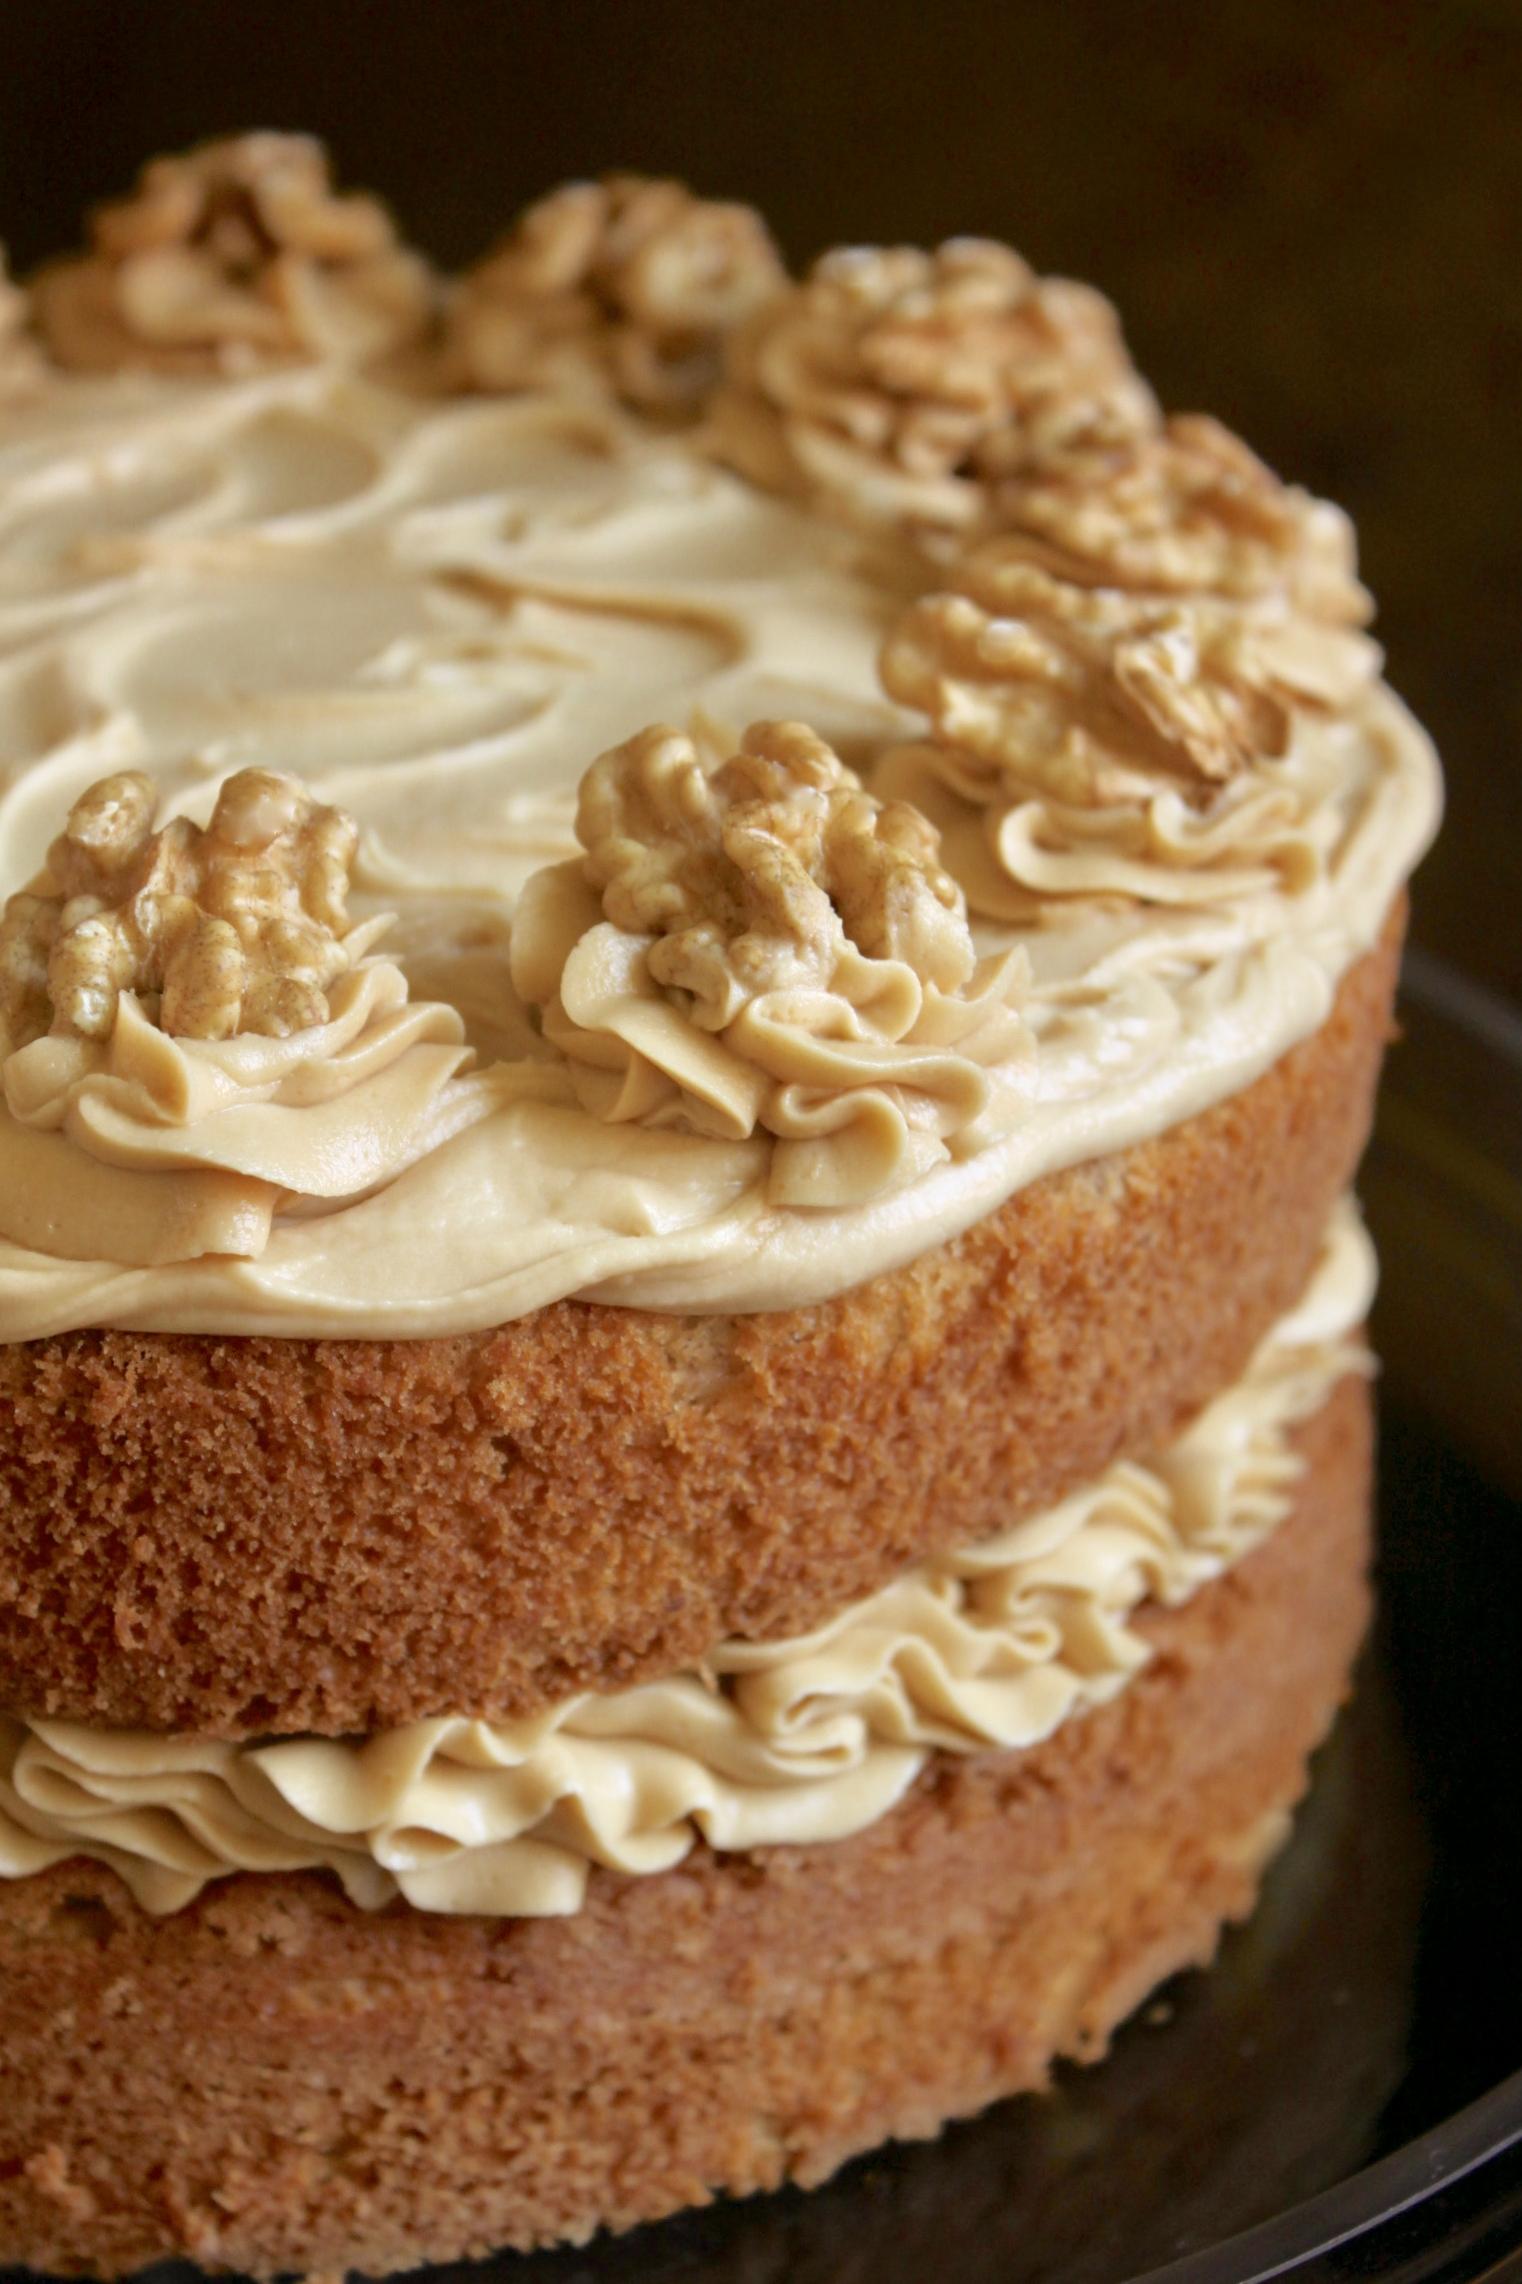  A scrumptious cake to go with your coffee